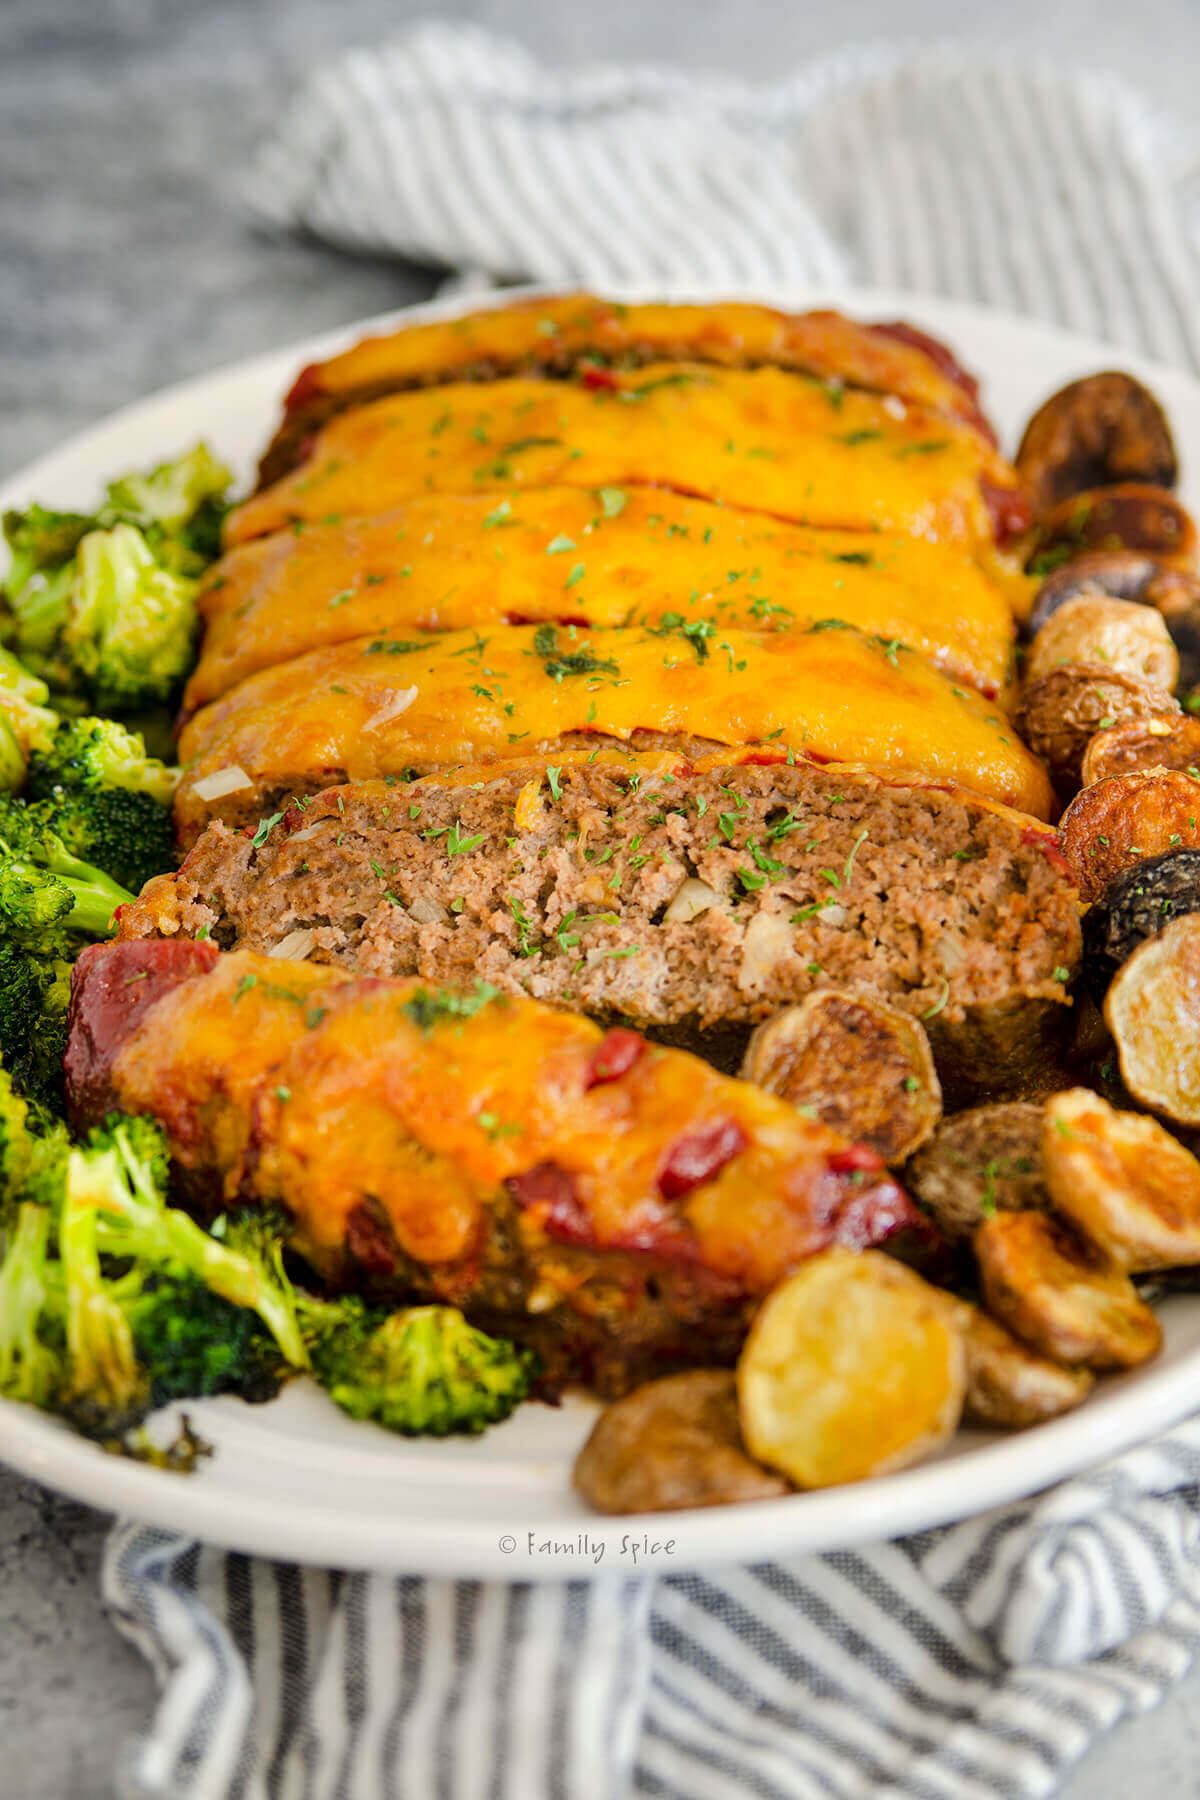 Closeup of a cheeseburger meatloaf cut into slices with roasted potatoes and broccoli next to it